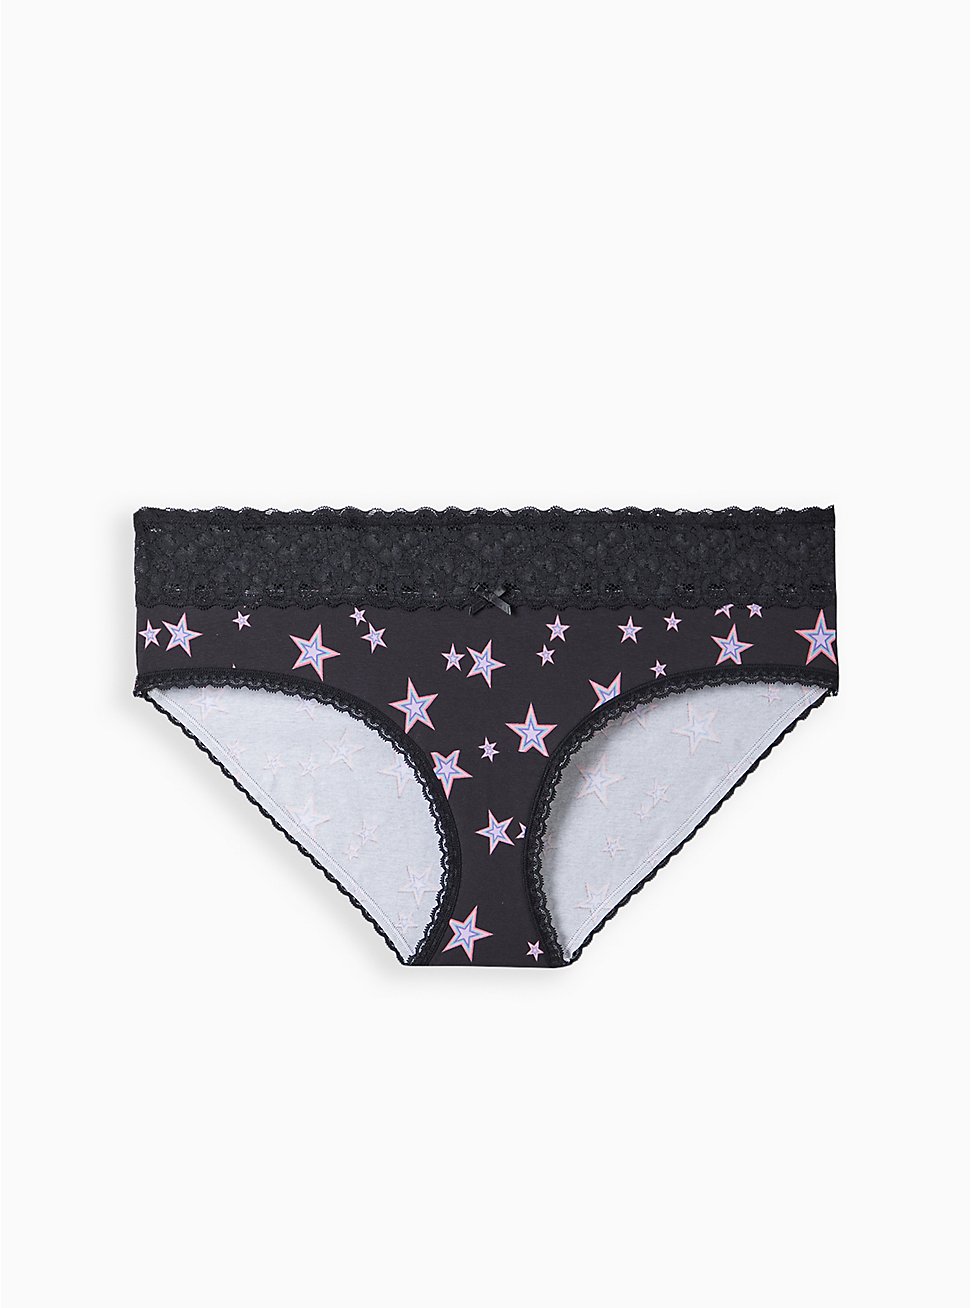 Wide Lace Trim Hipster Panty - Cotton Stars Black, RAINBOW STARS, hi-res